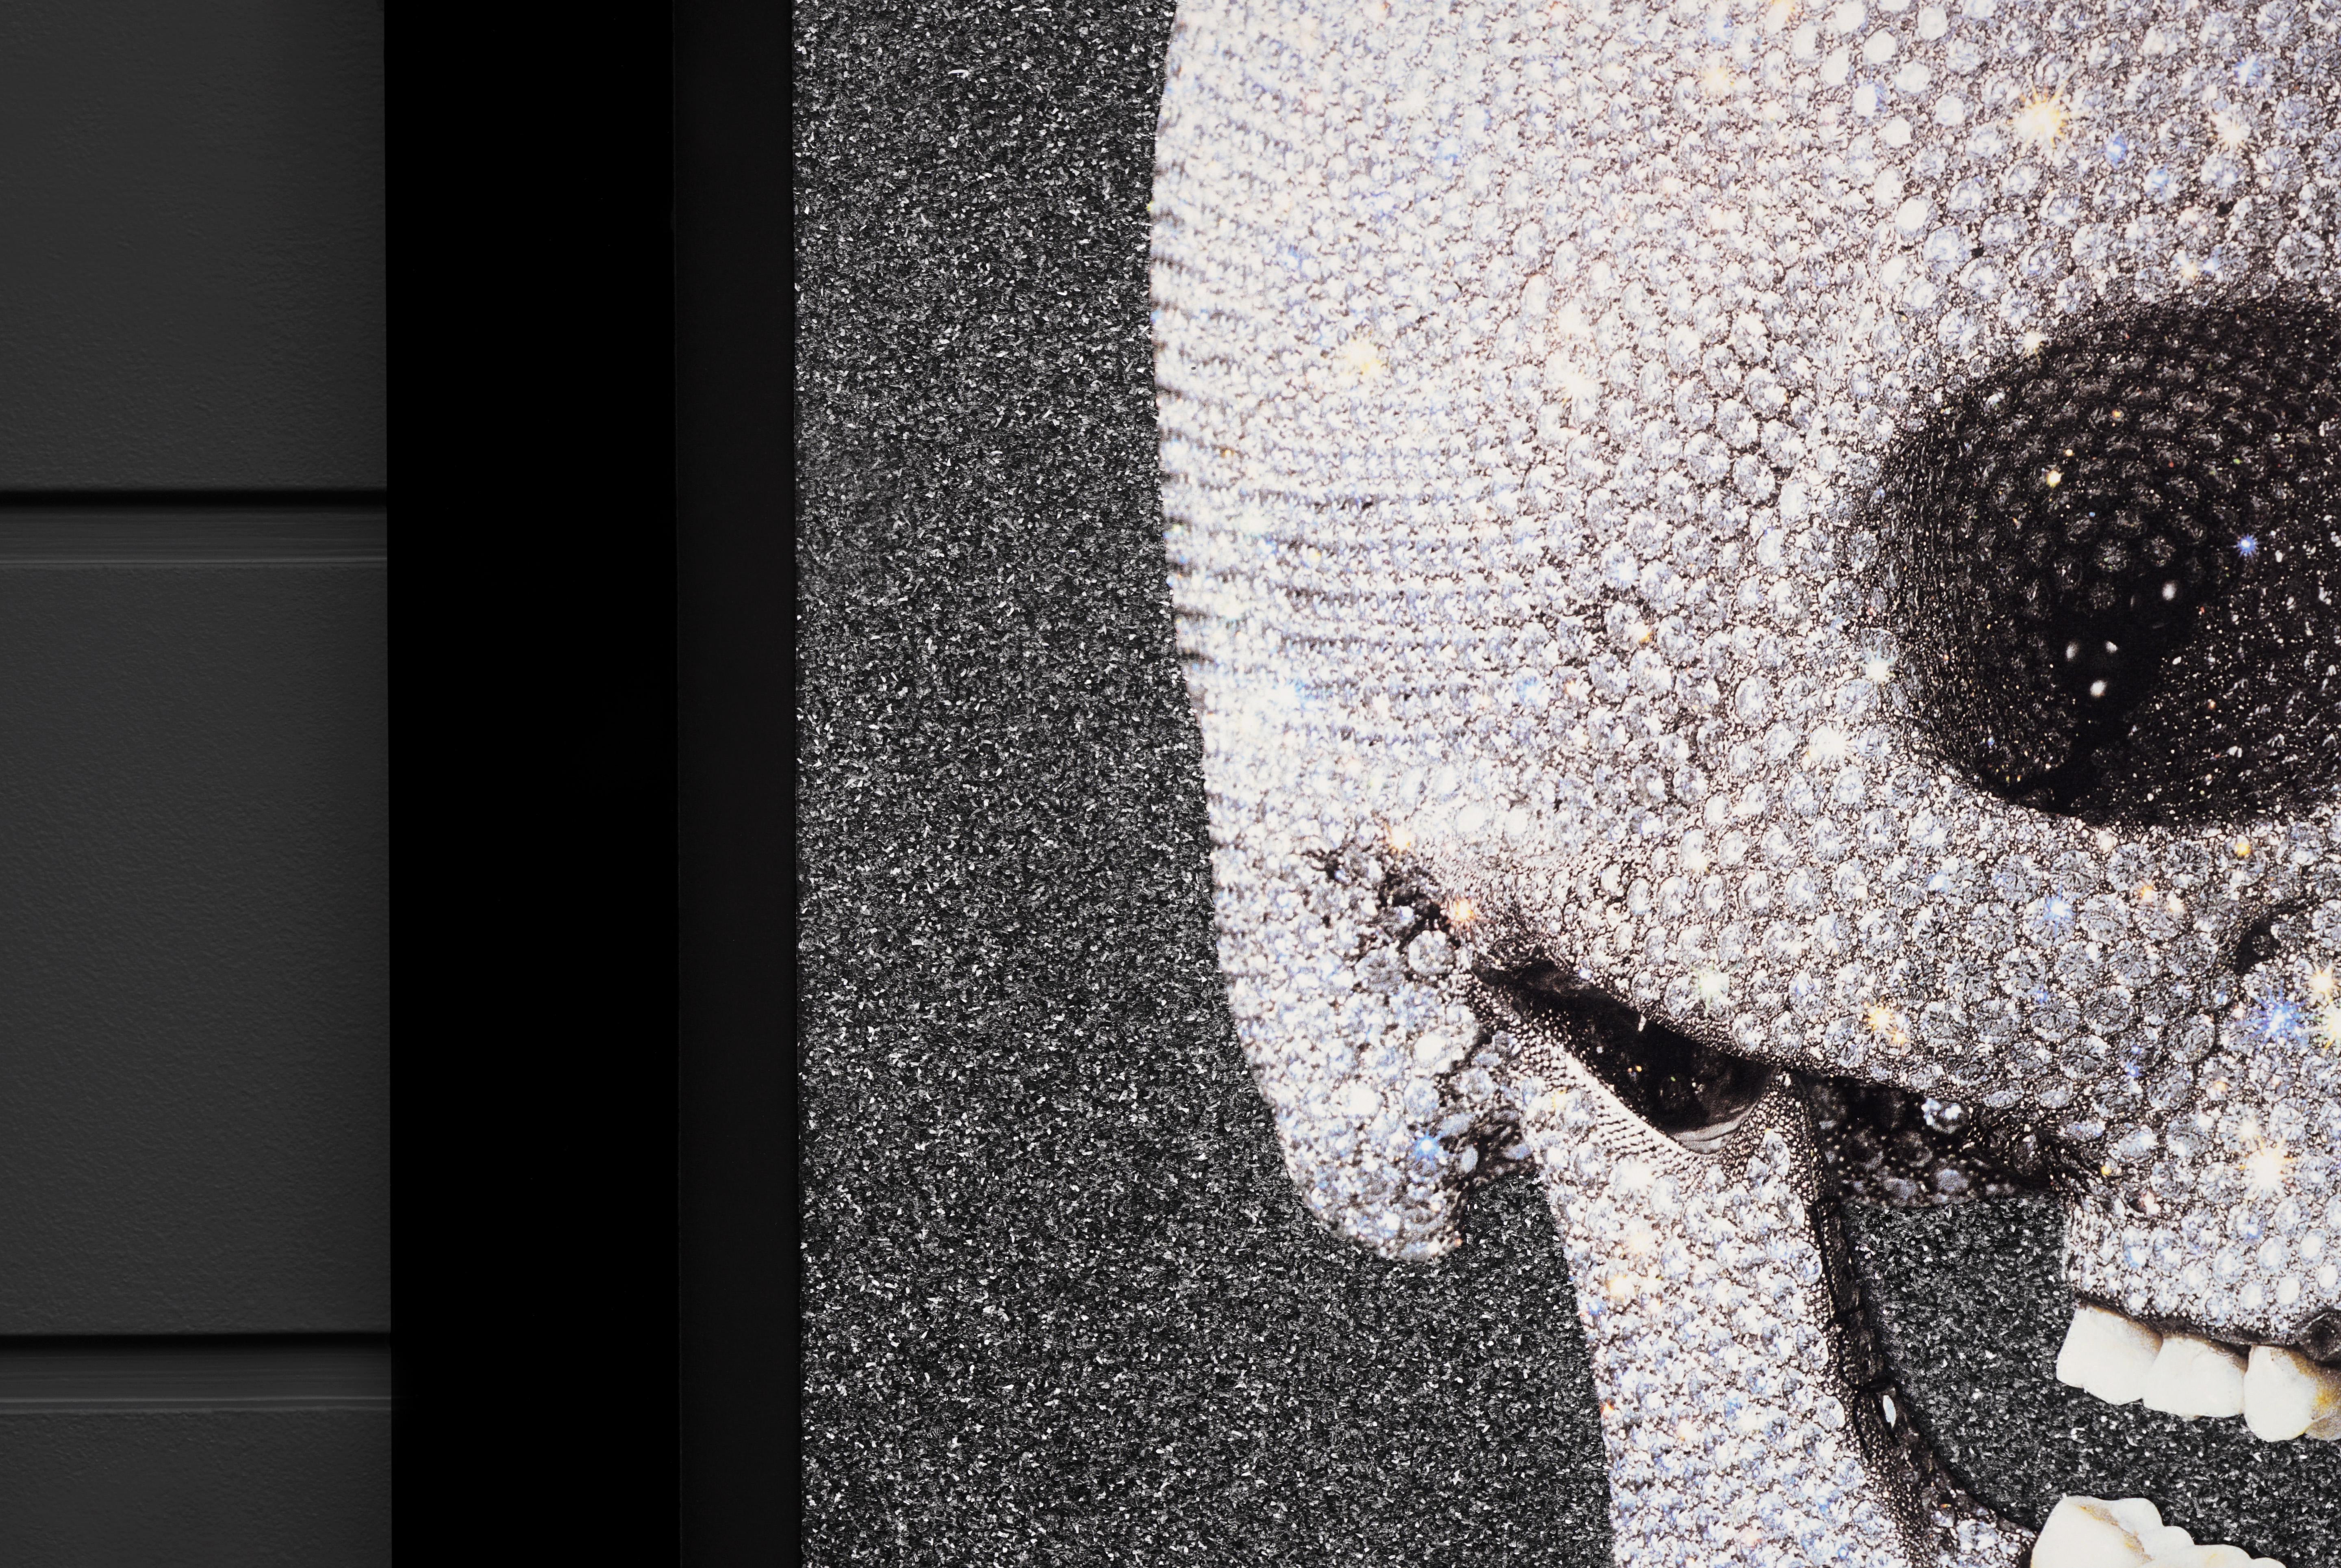 The sparkling pop-art laughing skull is an iconic contemporary memento mori silkscreen print with genuine glittering diamond dust by Damien Hirst. The jovial skull lights up the room with twinkling refraction and edgy subject matter, the blue chip